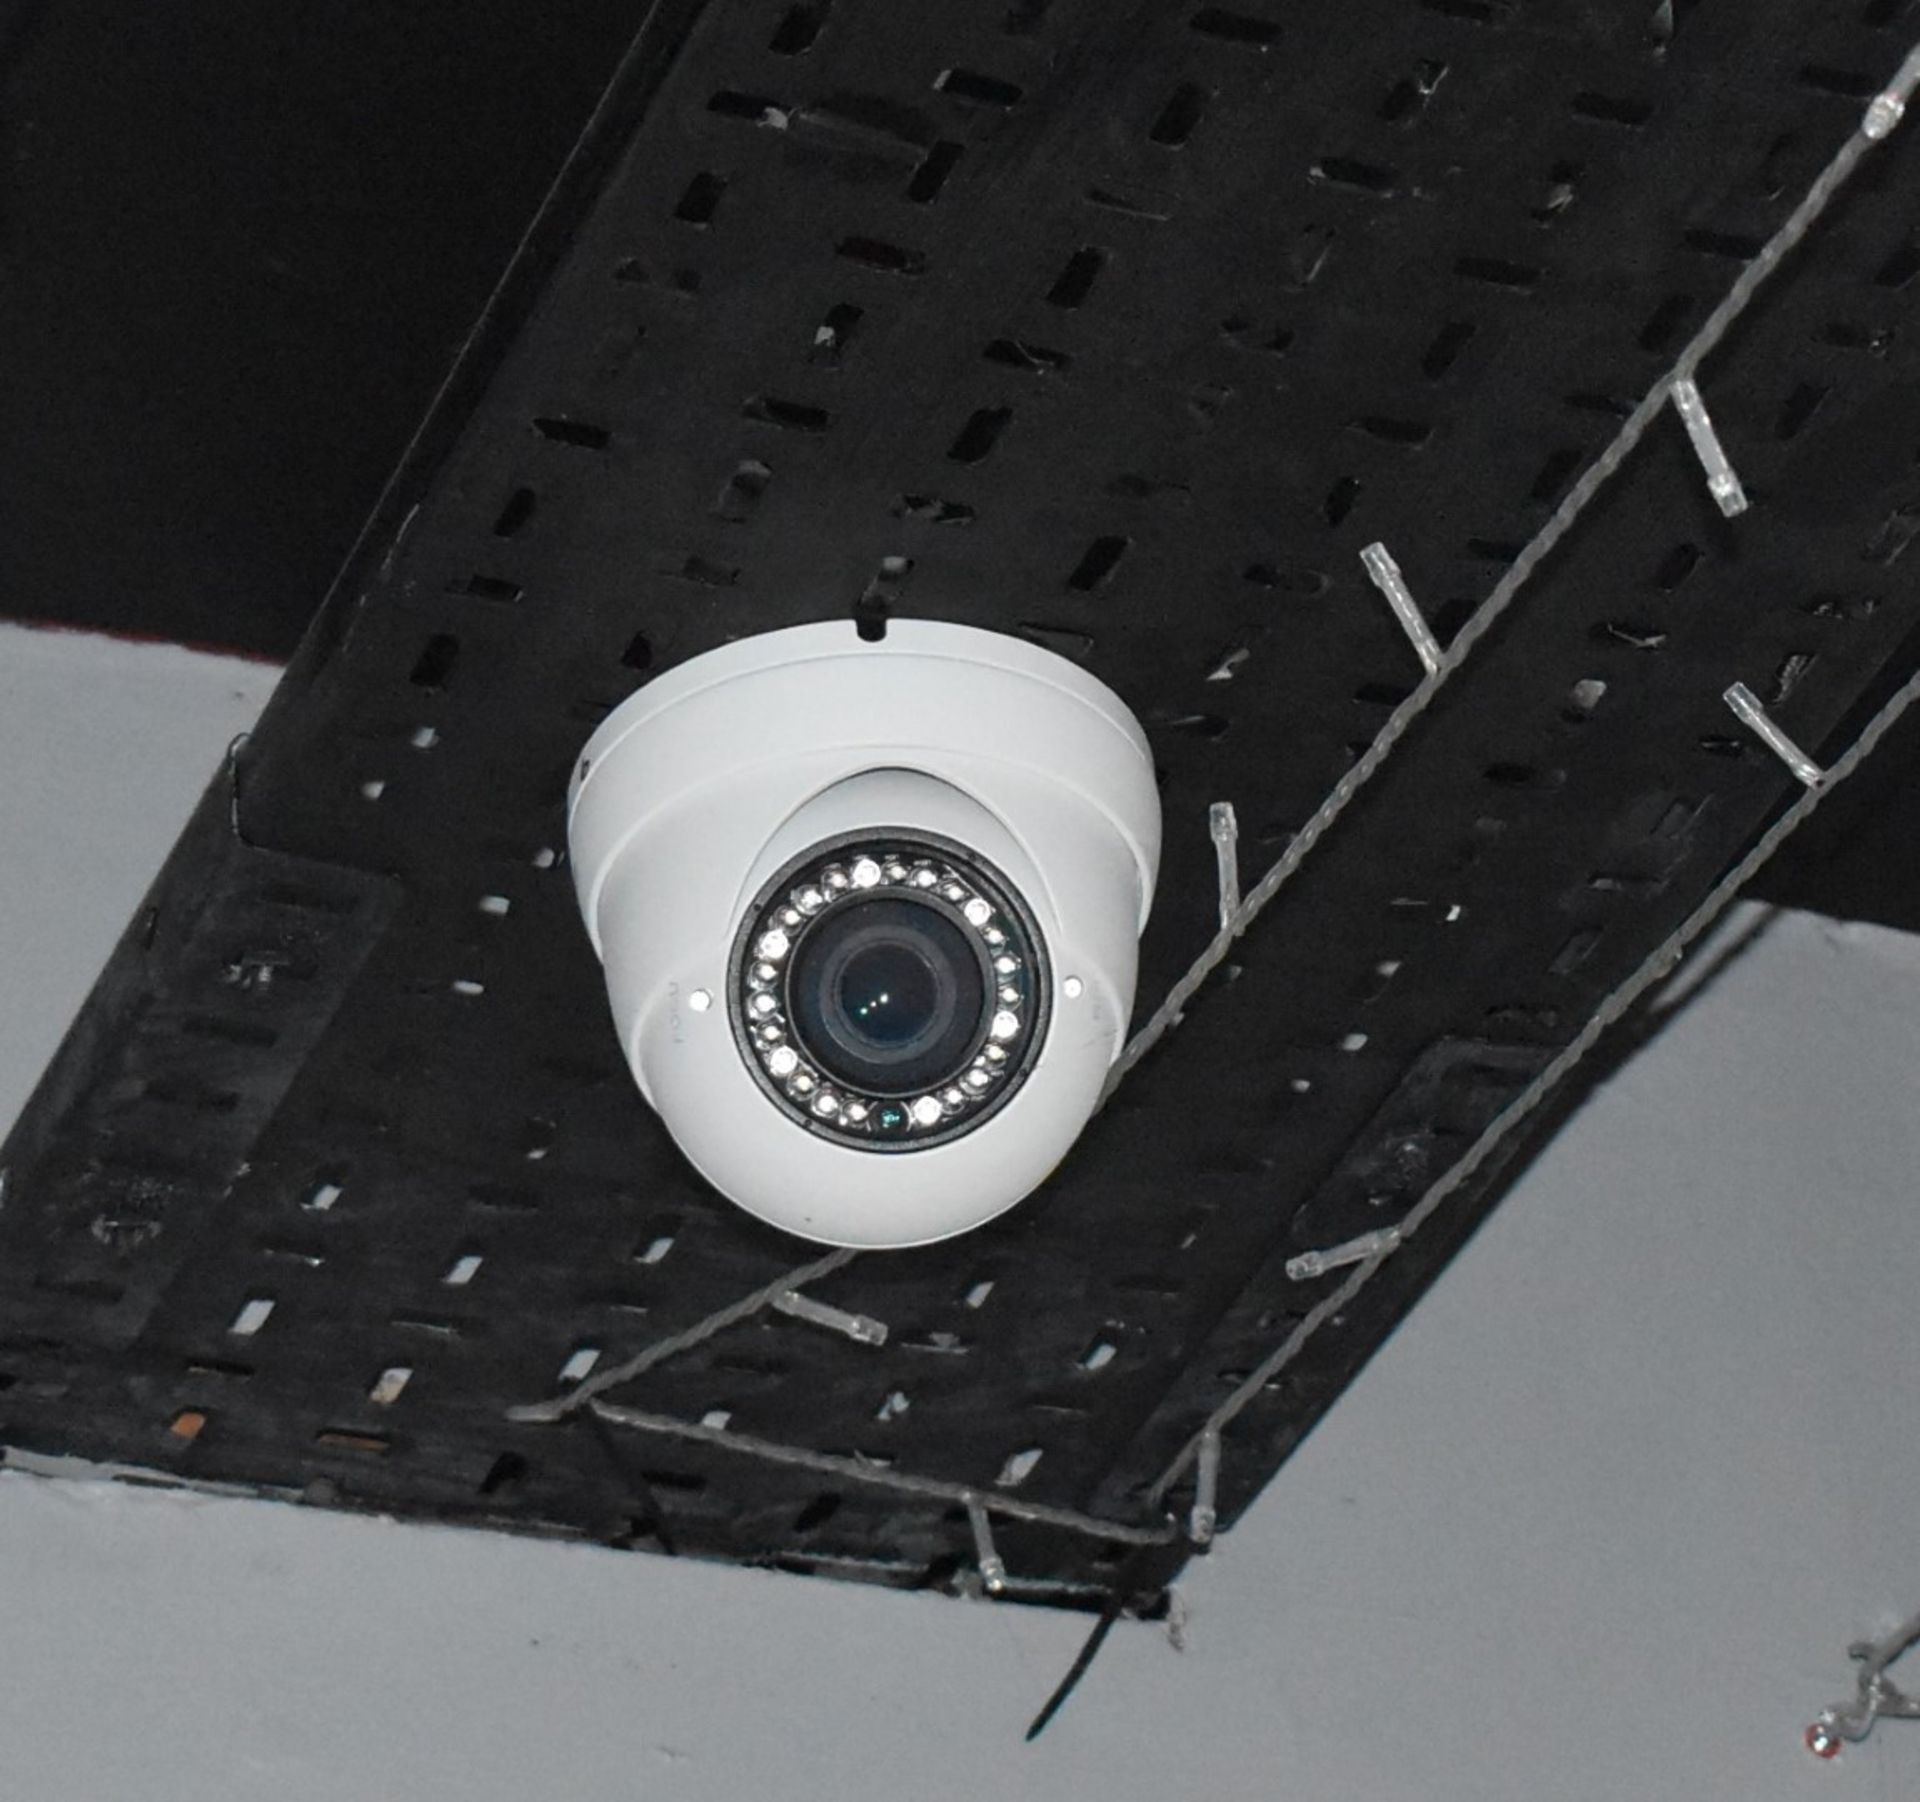 1 x Dalhua CCTV System With 8 Dome Cameras and Monitor - CL586 - Location: Stockport SK1 This item - Image 4 of 7